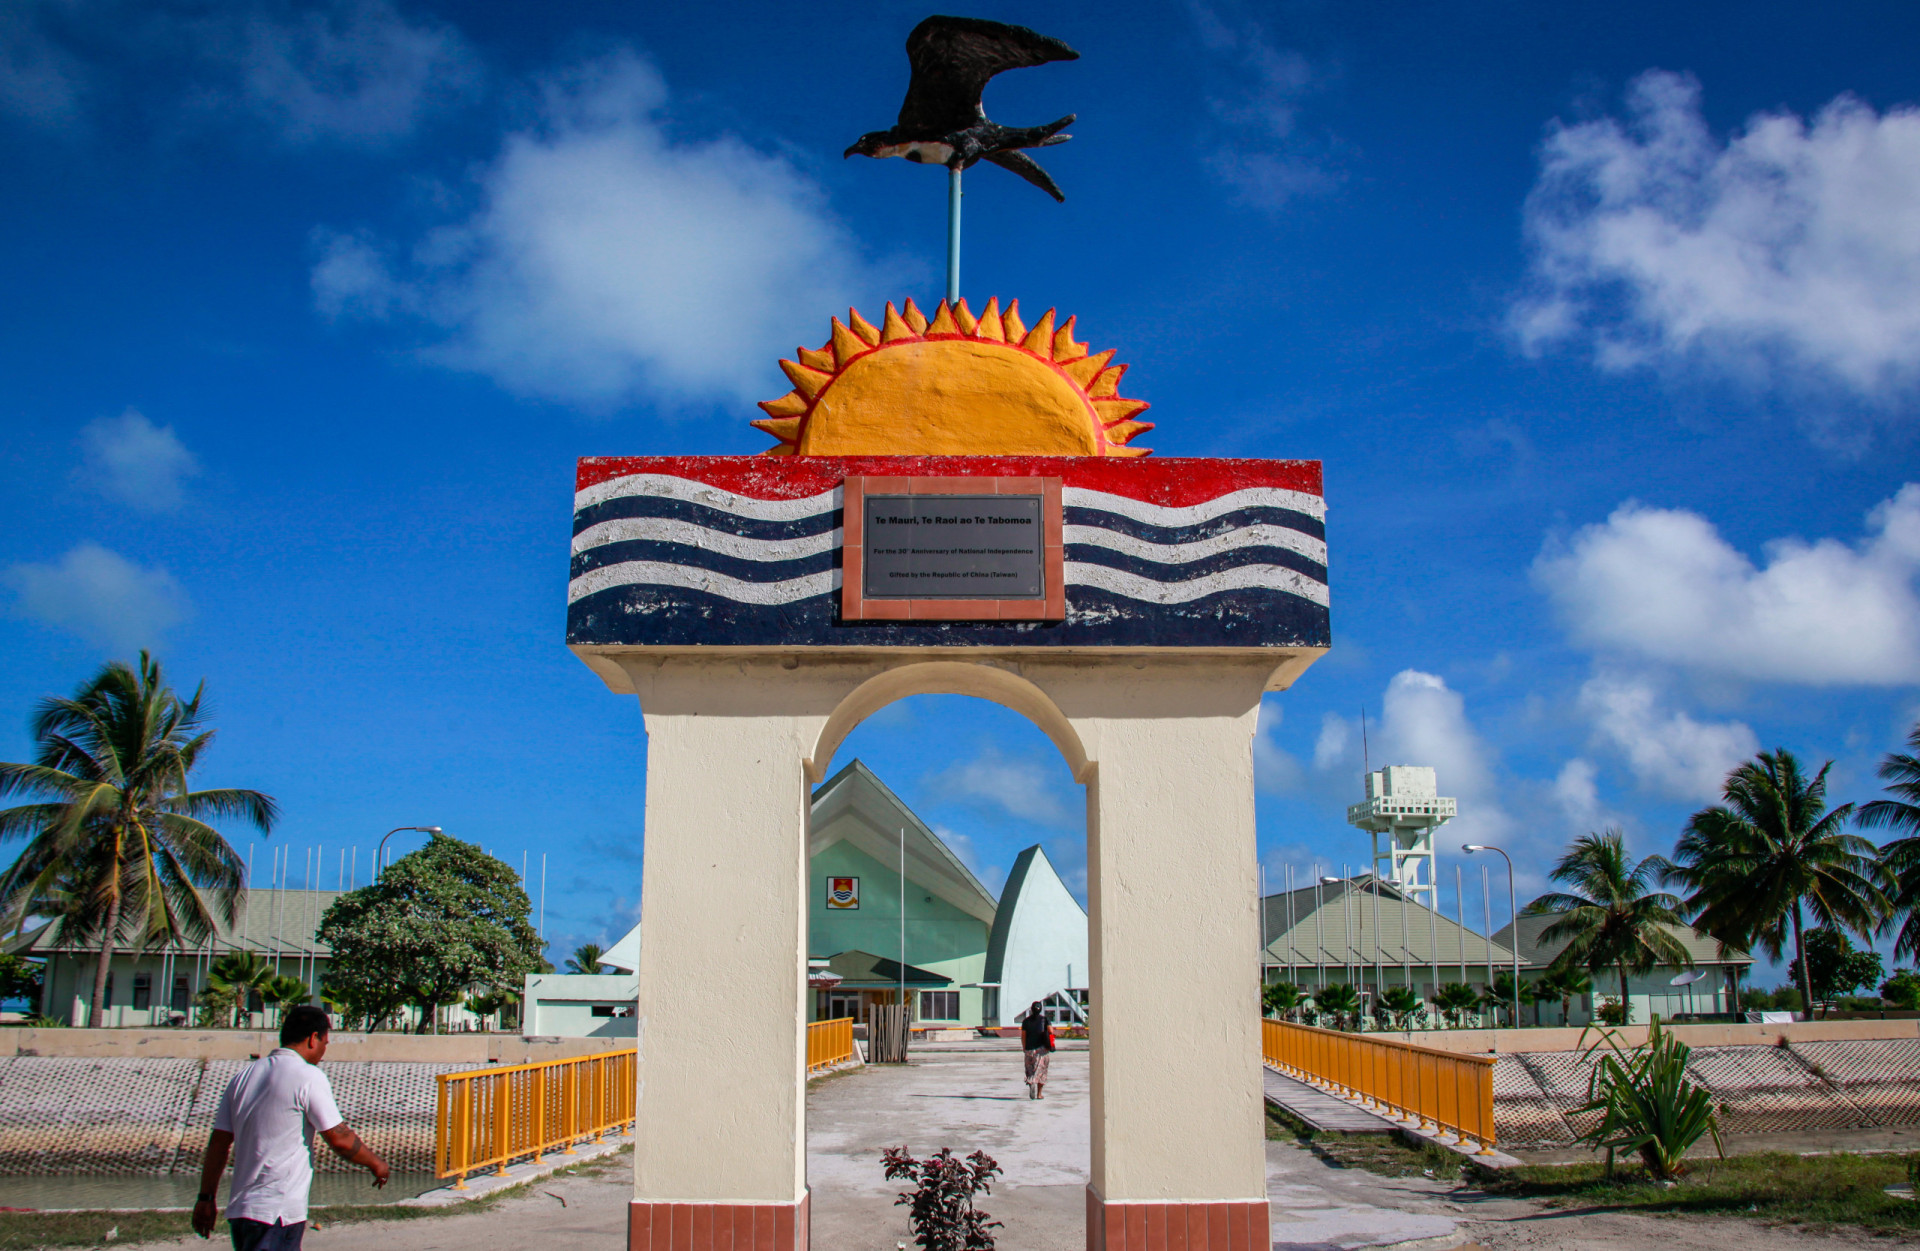 <p>These islands make up most of the nation of Kiribati. Indeed, the country’s capital city of Tarawa is located on one of the atolls in this group, where more than 50% of the nation’s population resides.</p><p><a href="https://www.msn.com/en-us/community/channel/vid-7xx8mnucu55yw63we9va2gwr7uihbxwc68fxqp25x6tg4ftibpra?cvid=94631541bc0f4f89bfd59158d696ad7e">Follow us and access great exclusive content every day</a></p>